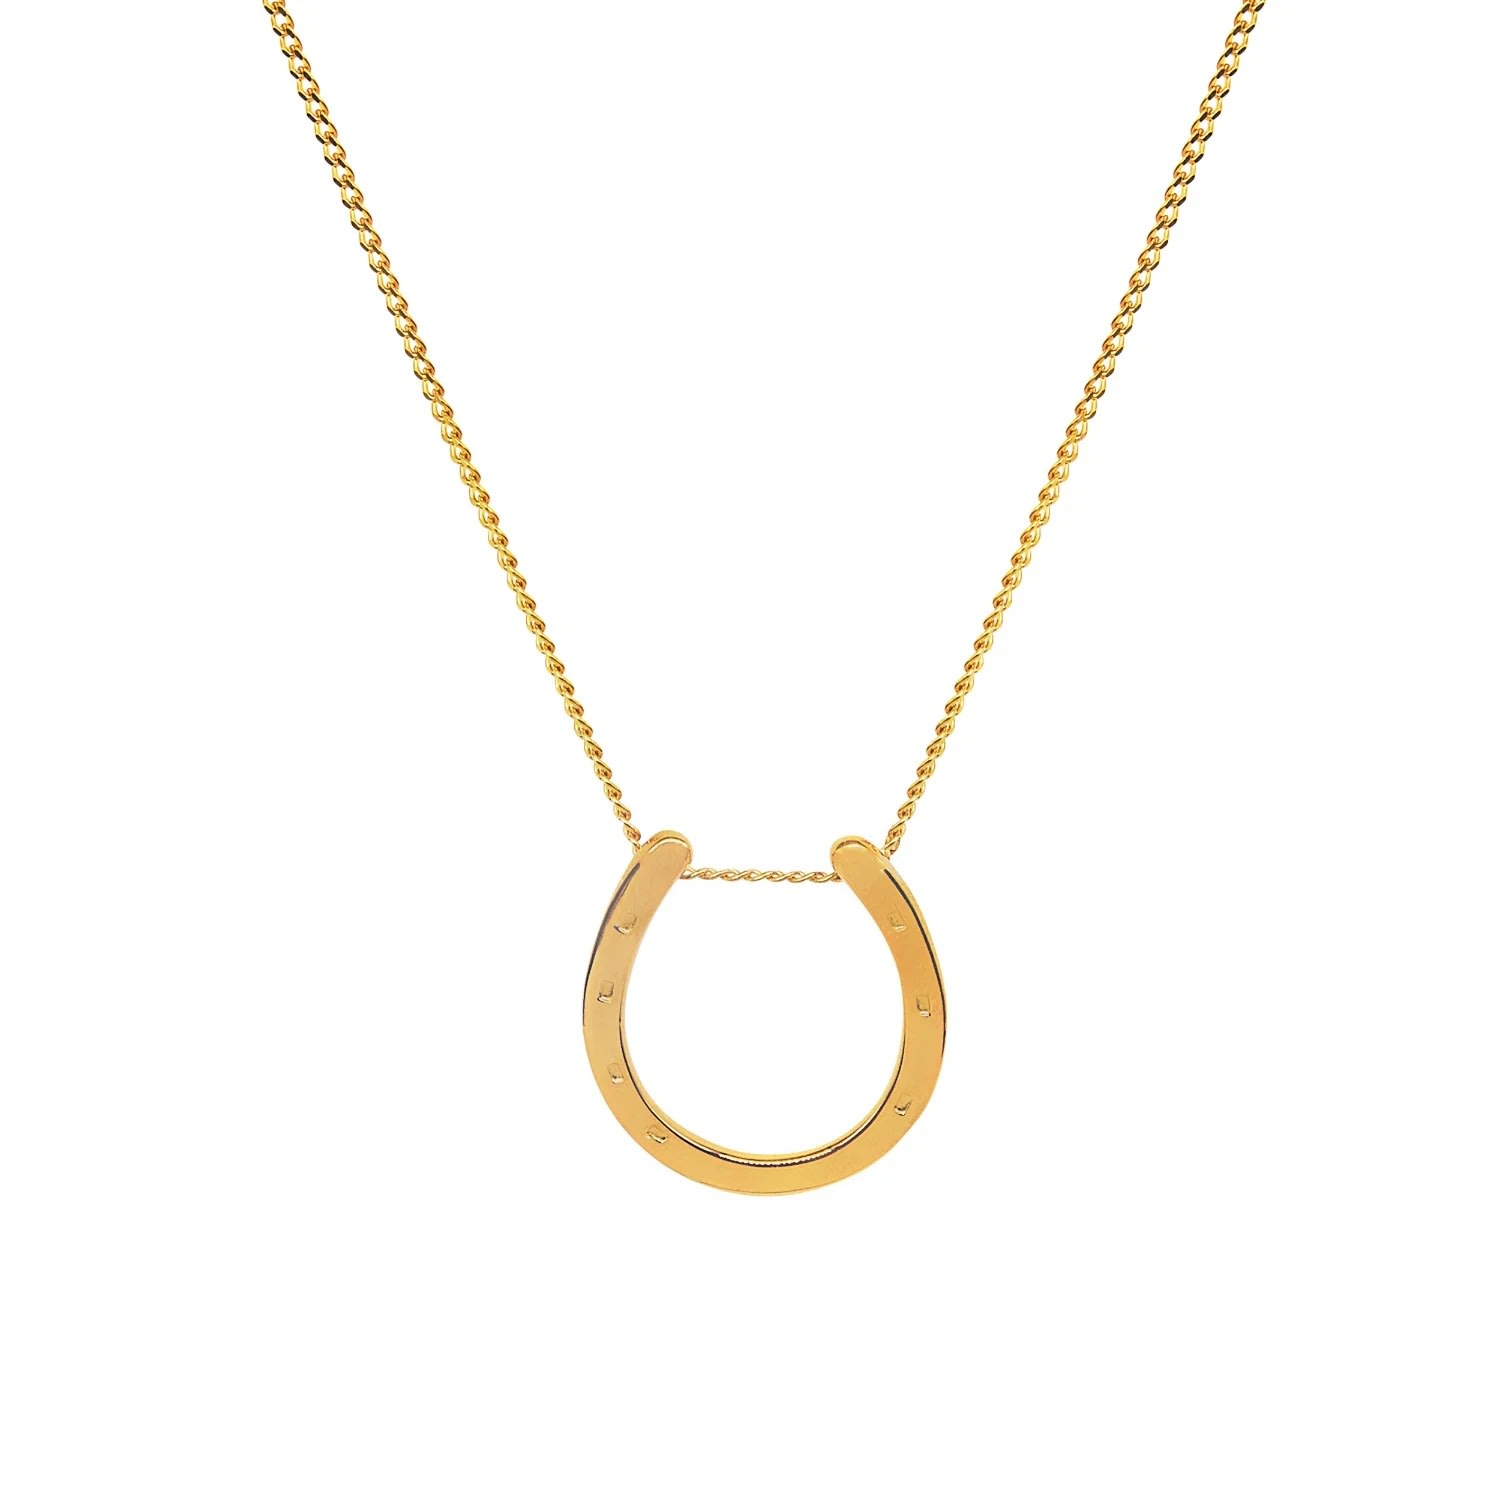 Men's Horseshoe Pendant & Chain In Gold Plated Katie Mullally